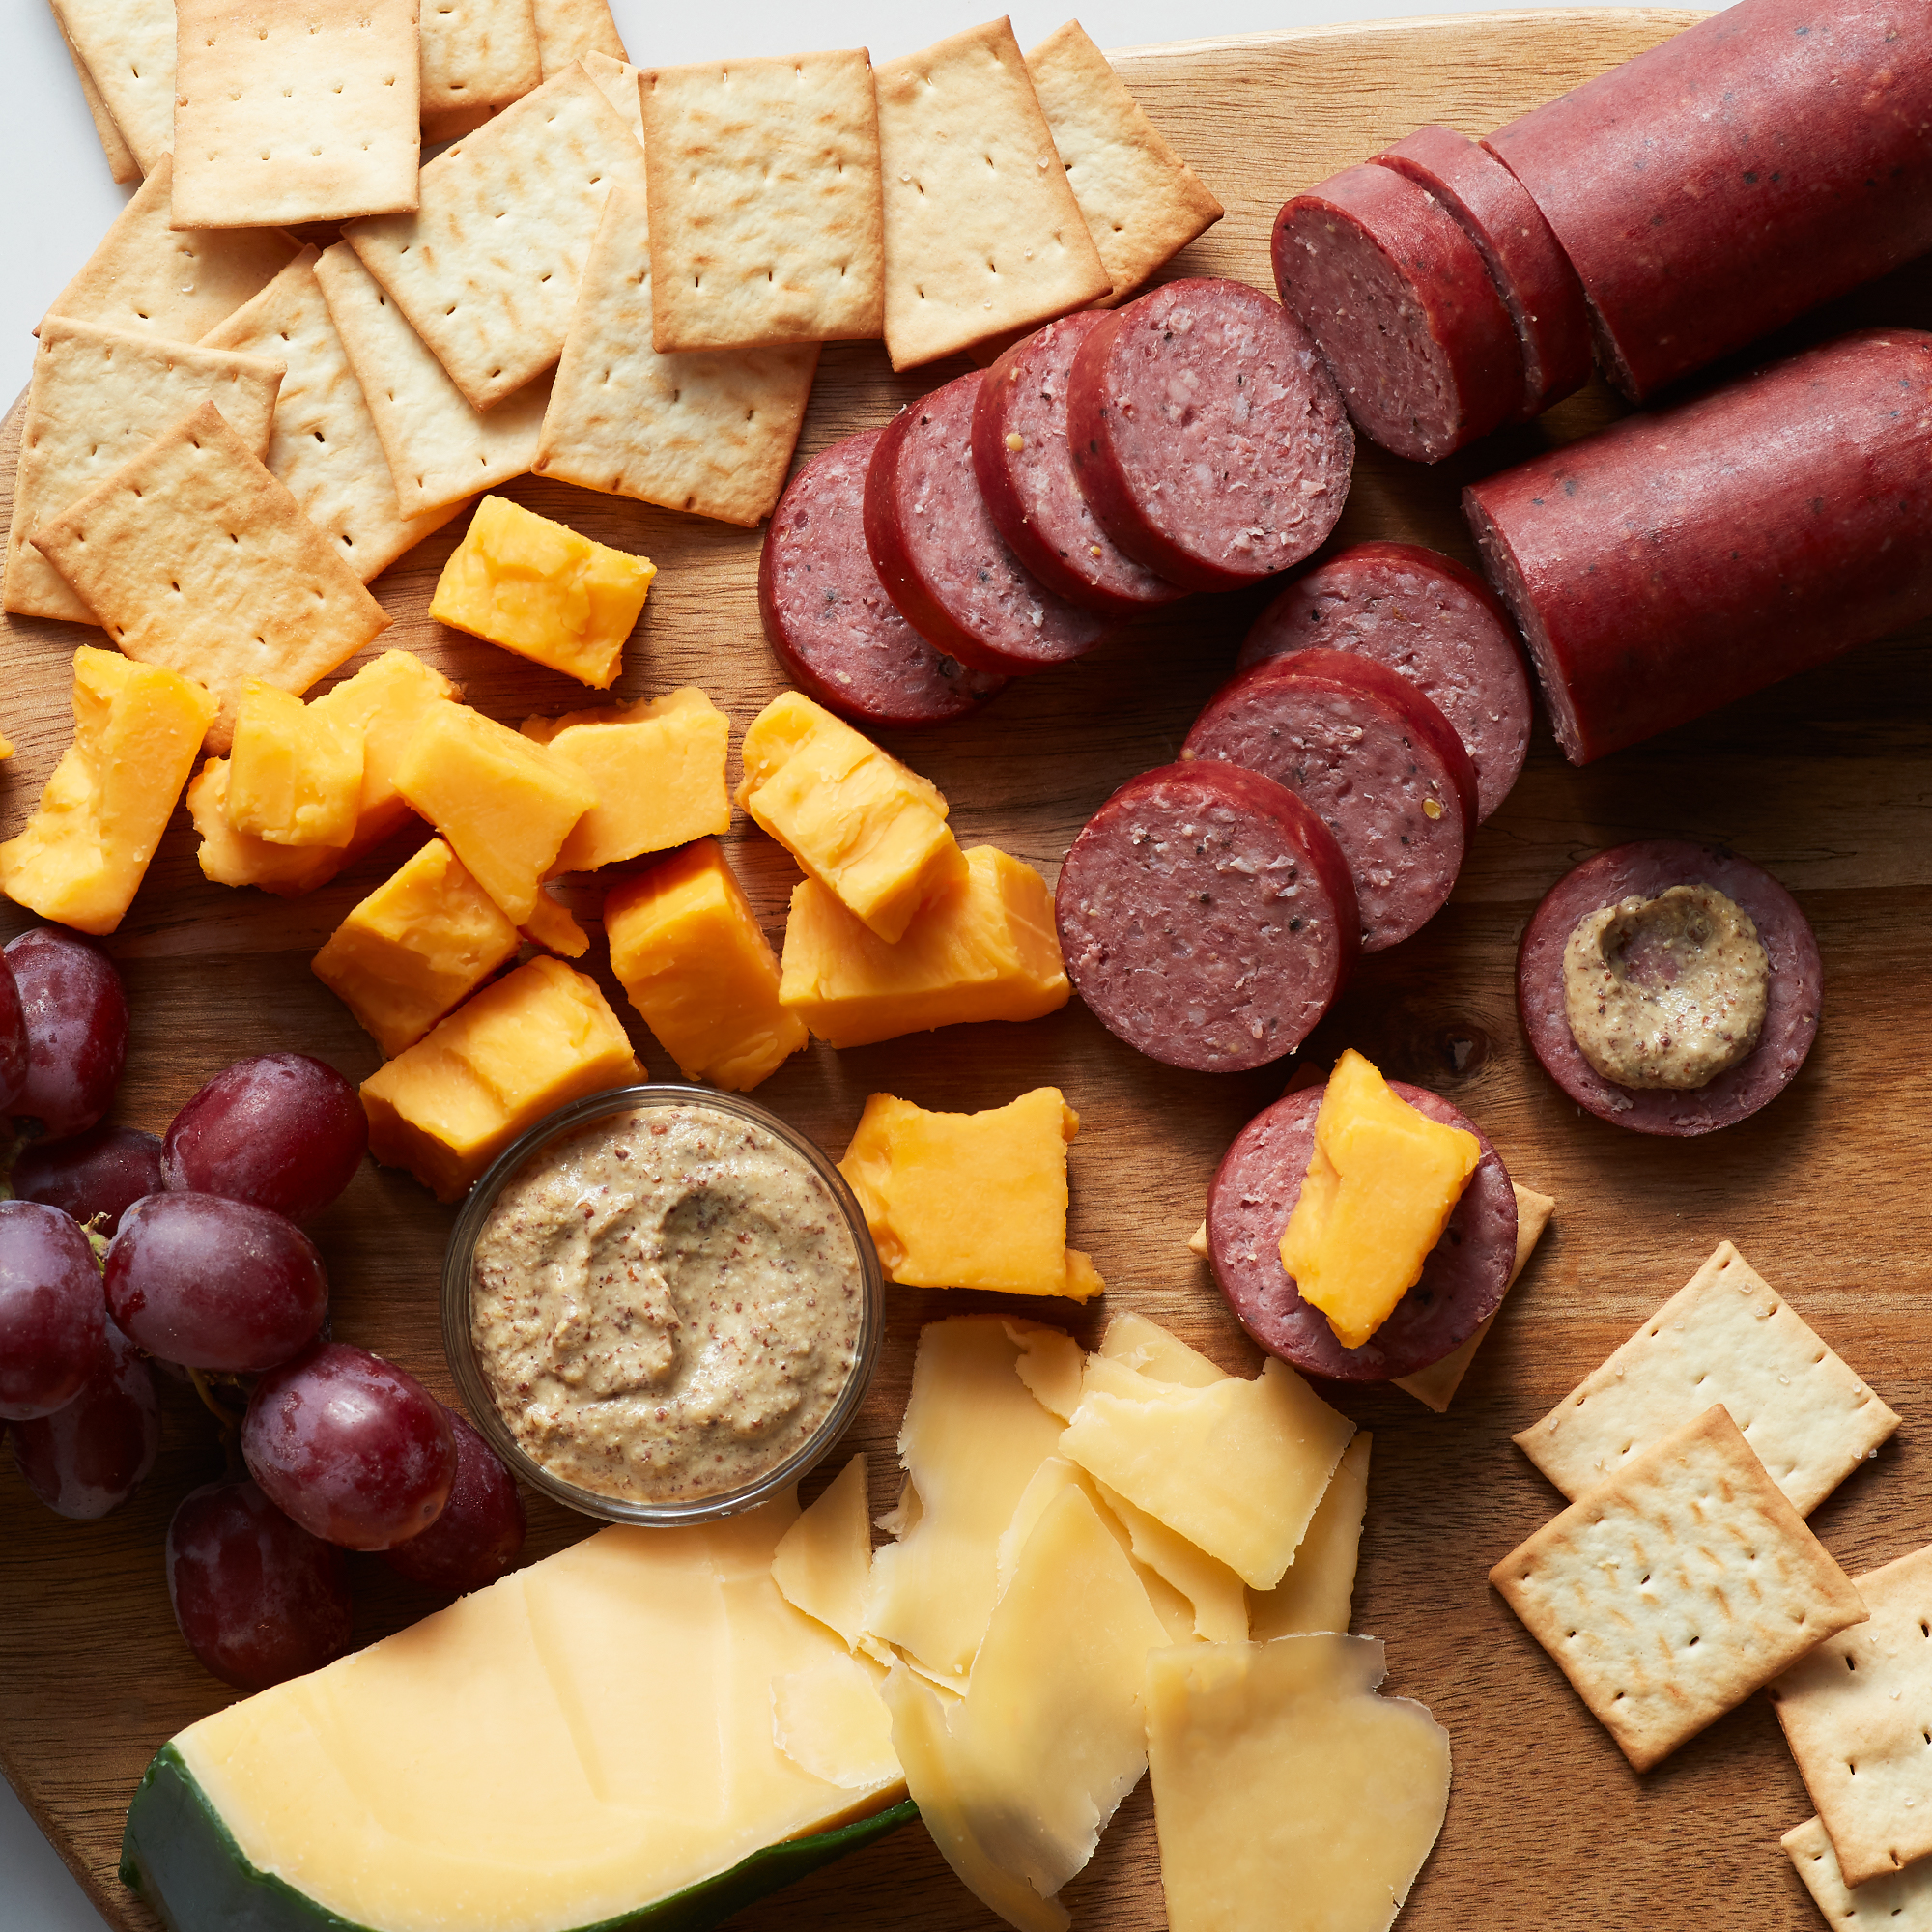 Hickory Farms - This Summer Sausage and Cheese Gift Box